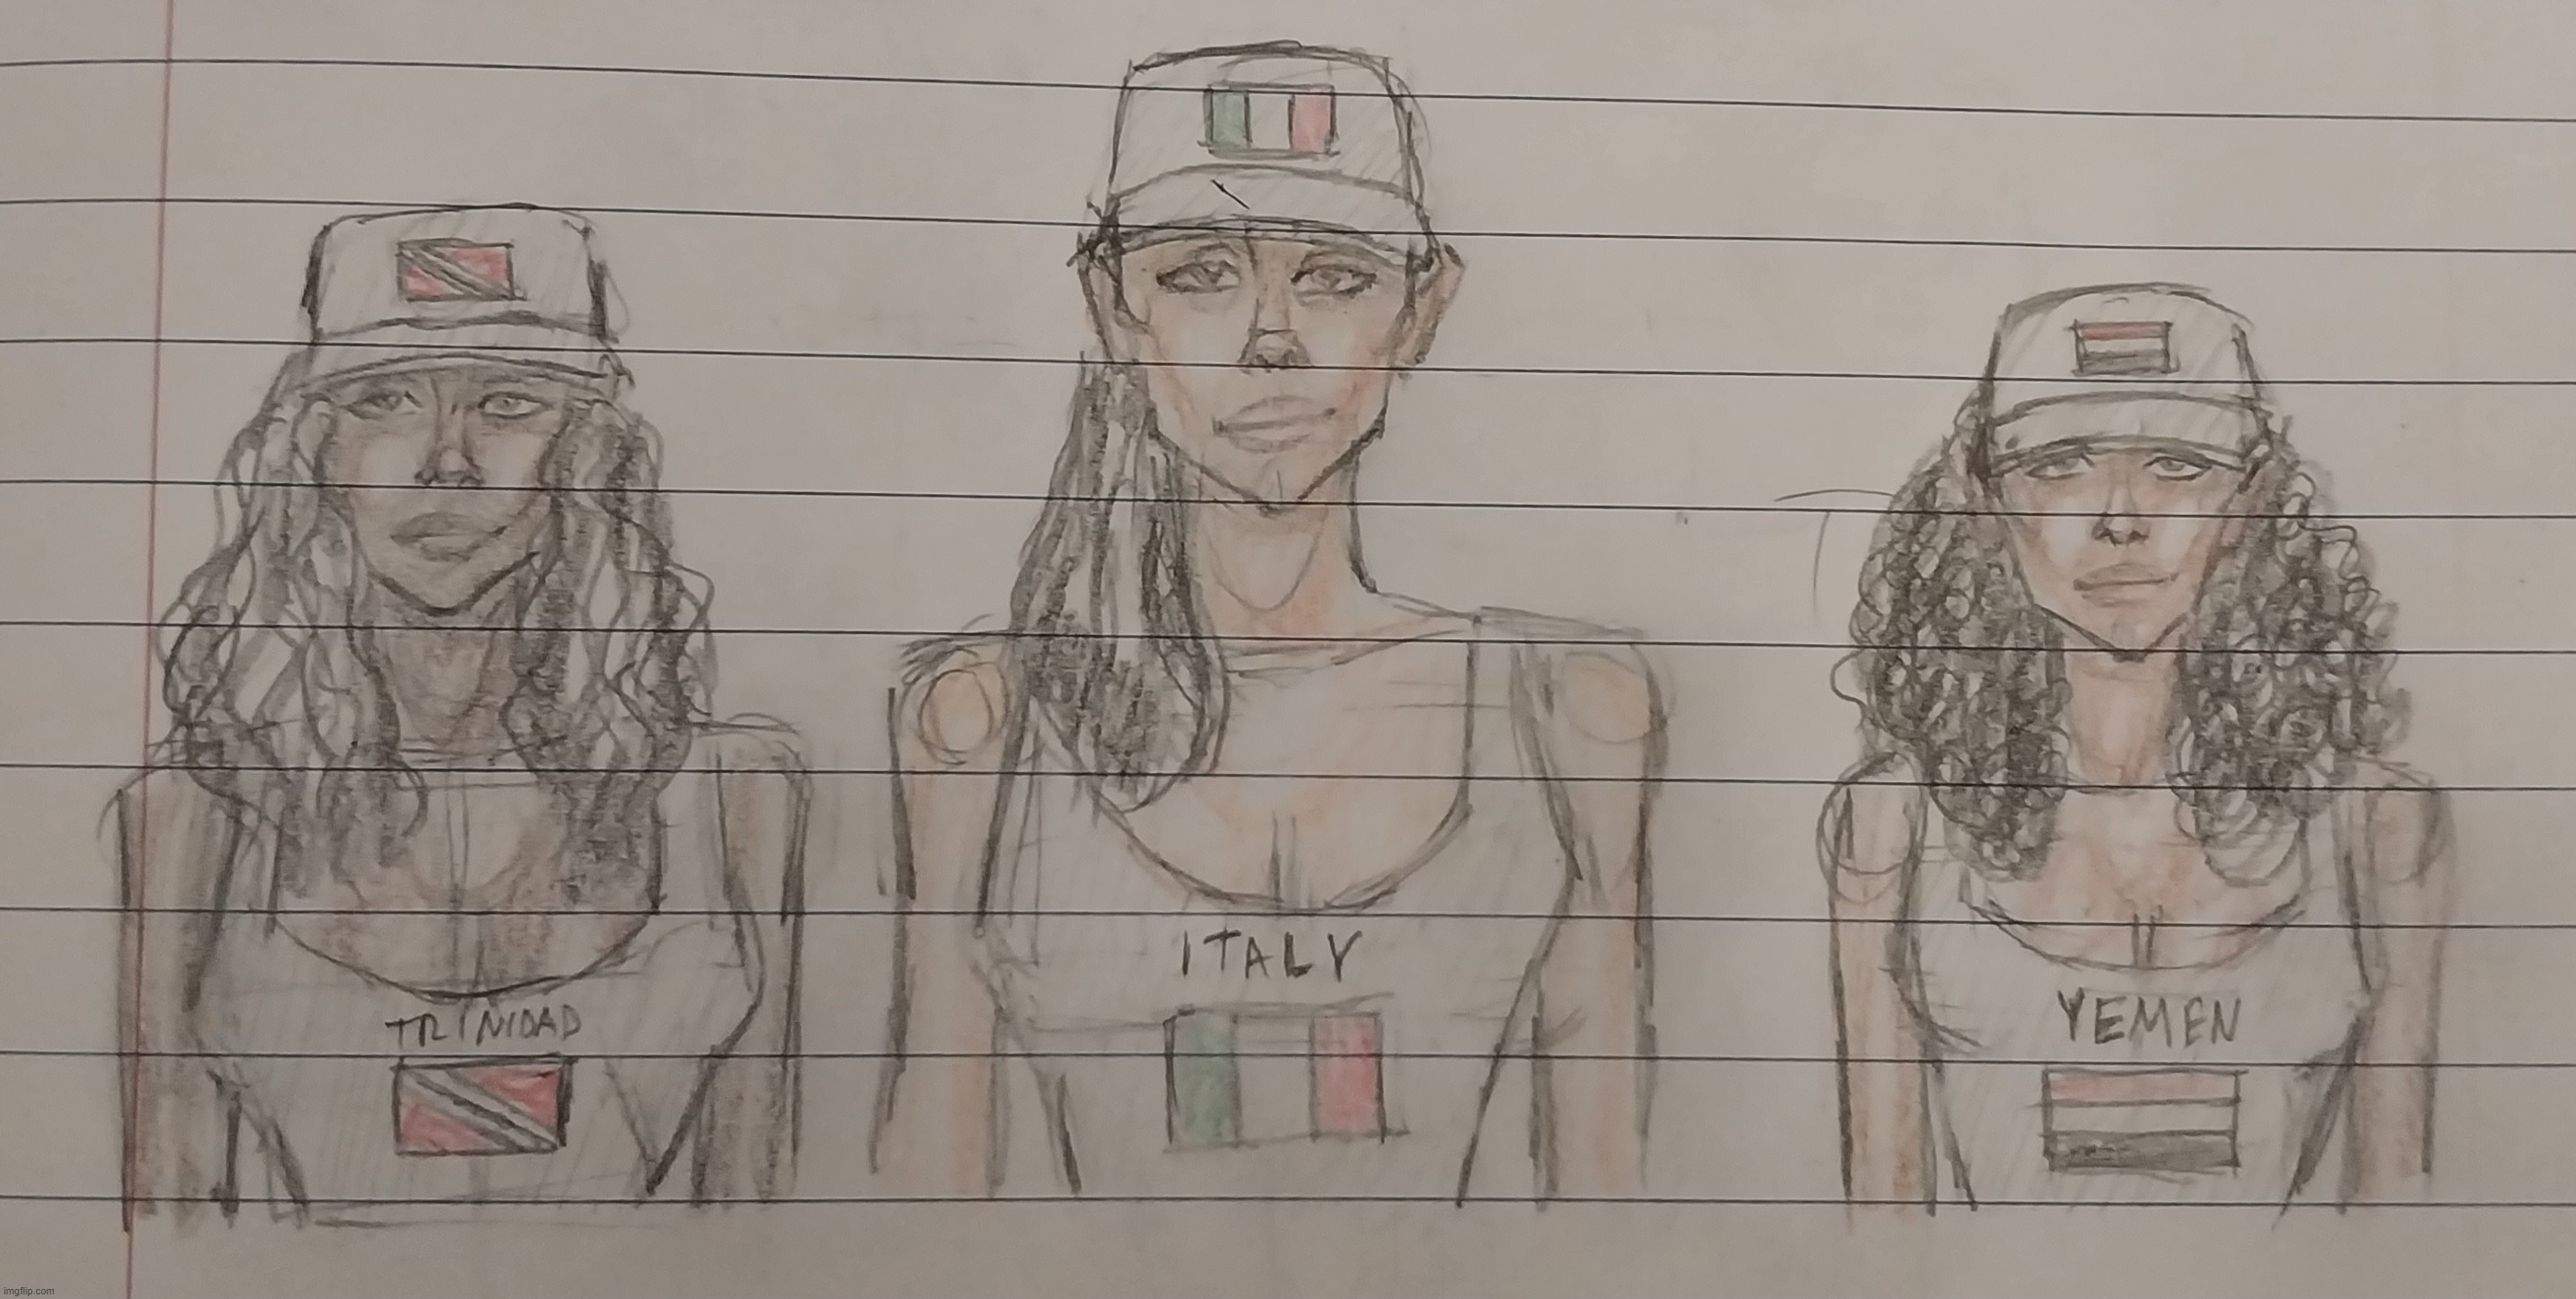 Trinidad, Italy, Yemen | image tagged in girls,drawings,color,countries | made w/ Imgflip meme maker